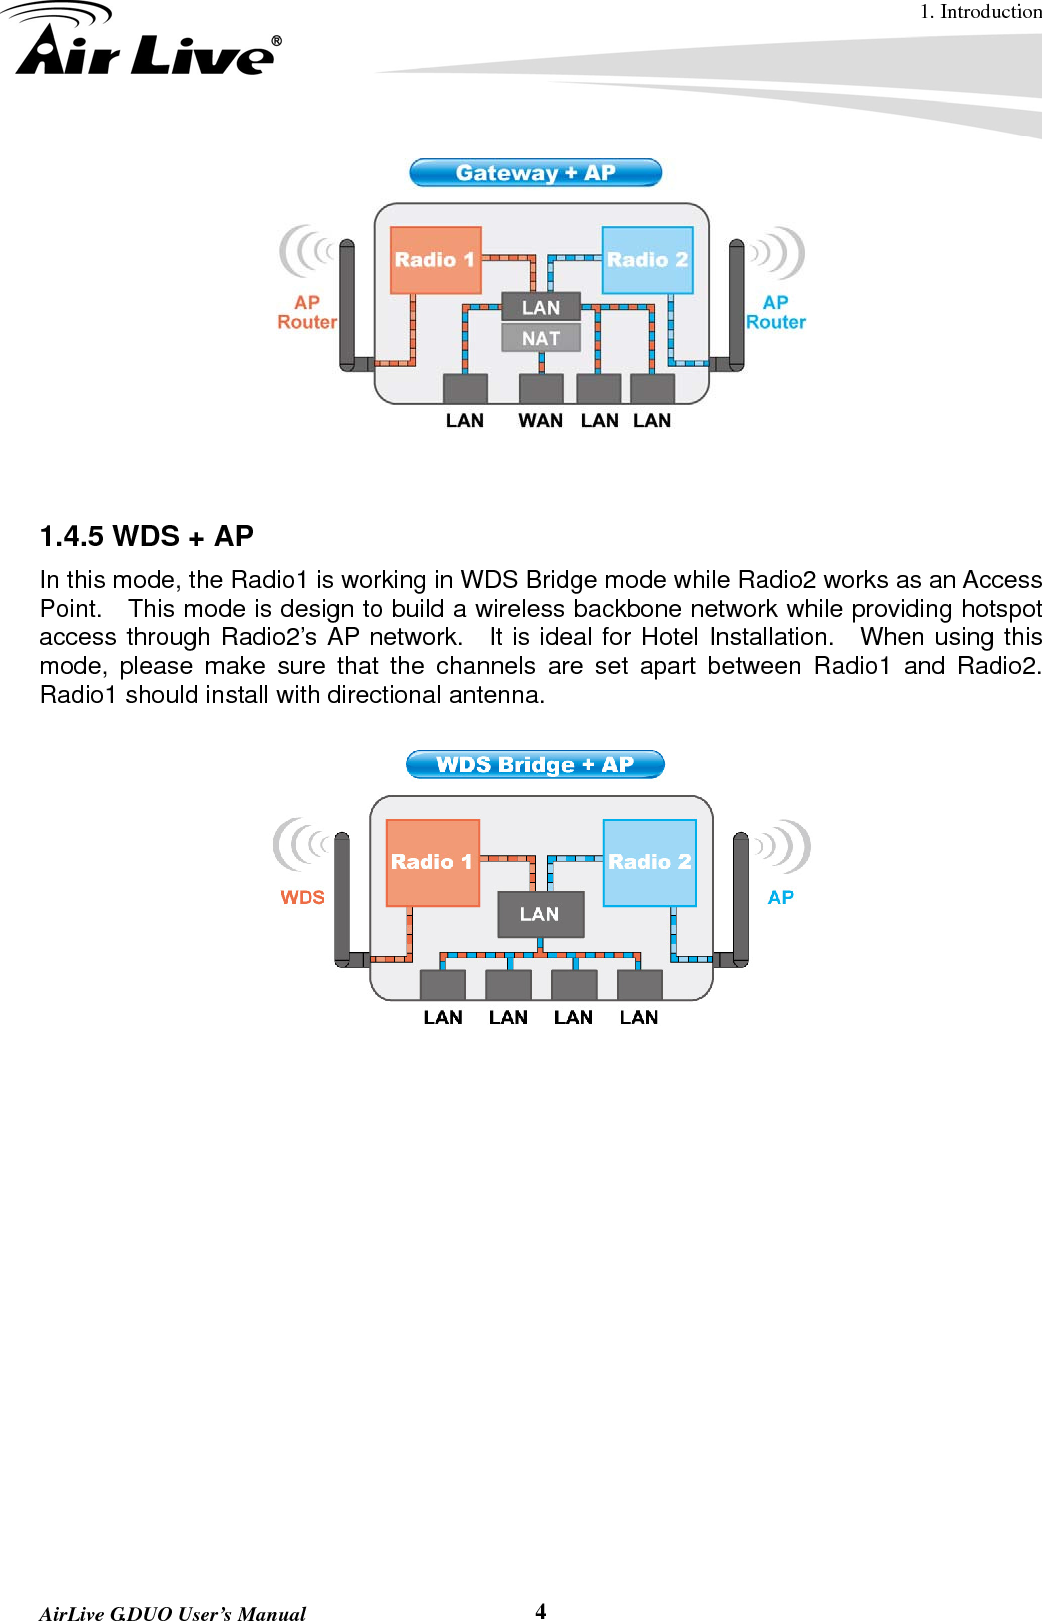 1. Introduction  AirLive G.DUO User’s Manual  4   1.4.5 WDS + AP In this mode, the Radio1 is working in WDS Bridge mode while Radio2 works as an Access Point.    This mode is design to build a wireless backbone network while providing hotspot access through Radio2’s AP network.  It is ideal for Hotel Installation.   When using this mode, please make sure that the channels are set apart between Radio1 and Radio2.  Radio1 should install with directional antenna.   